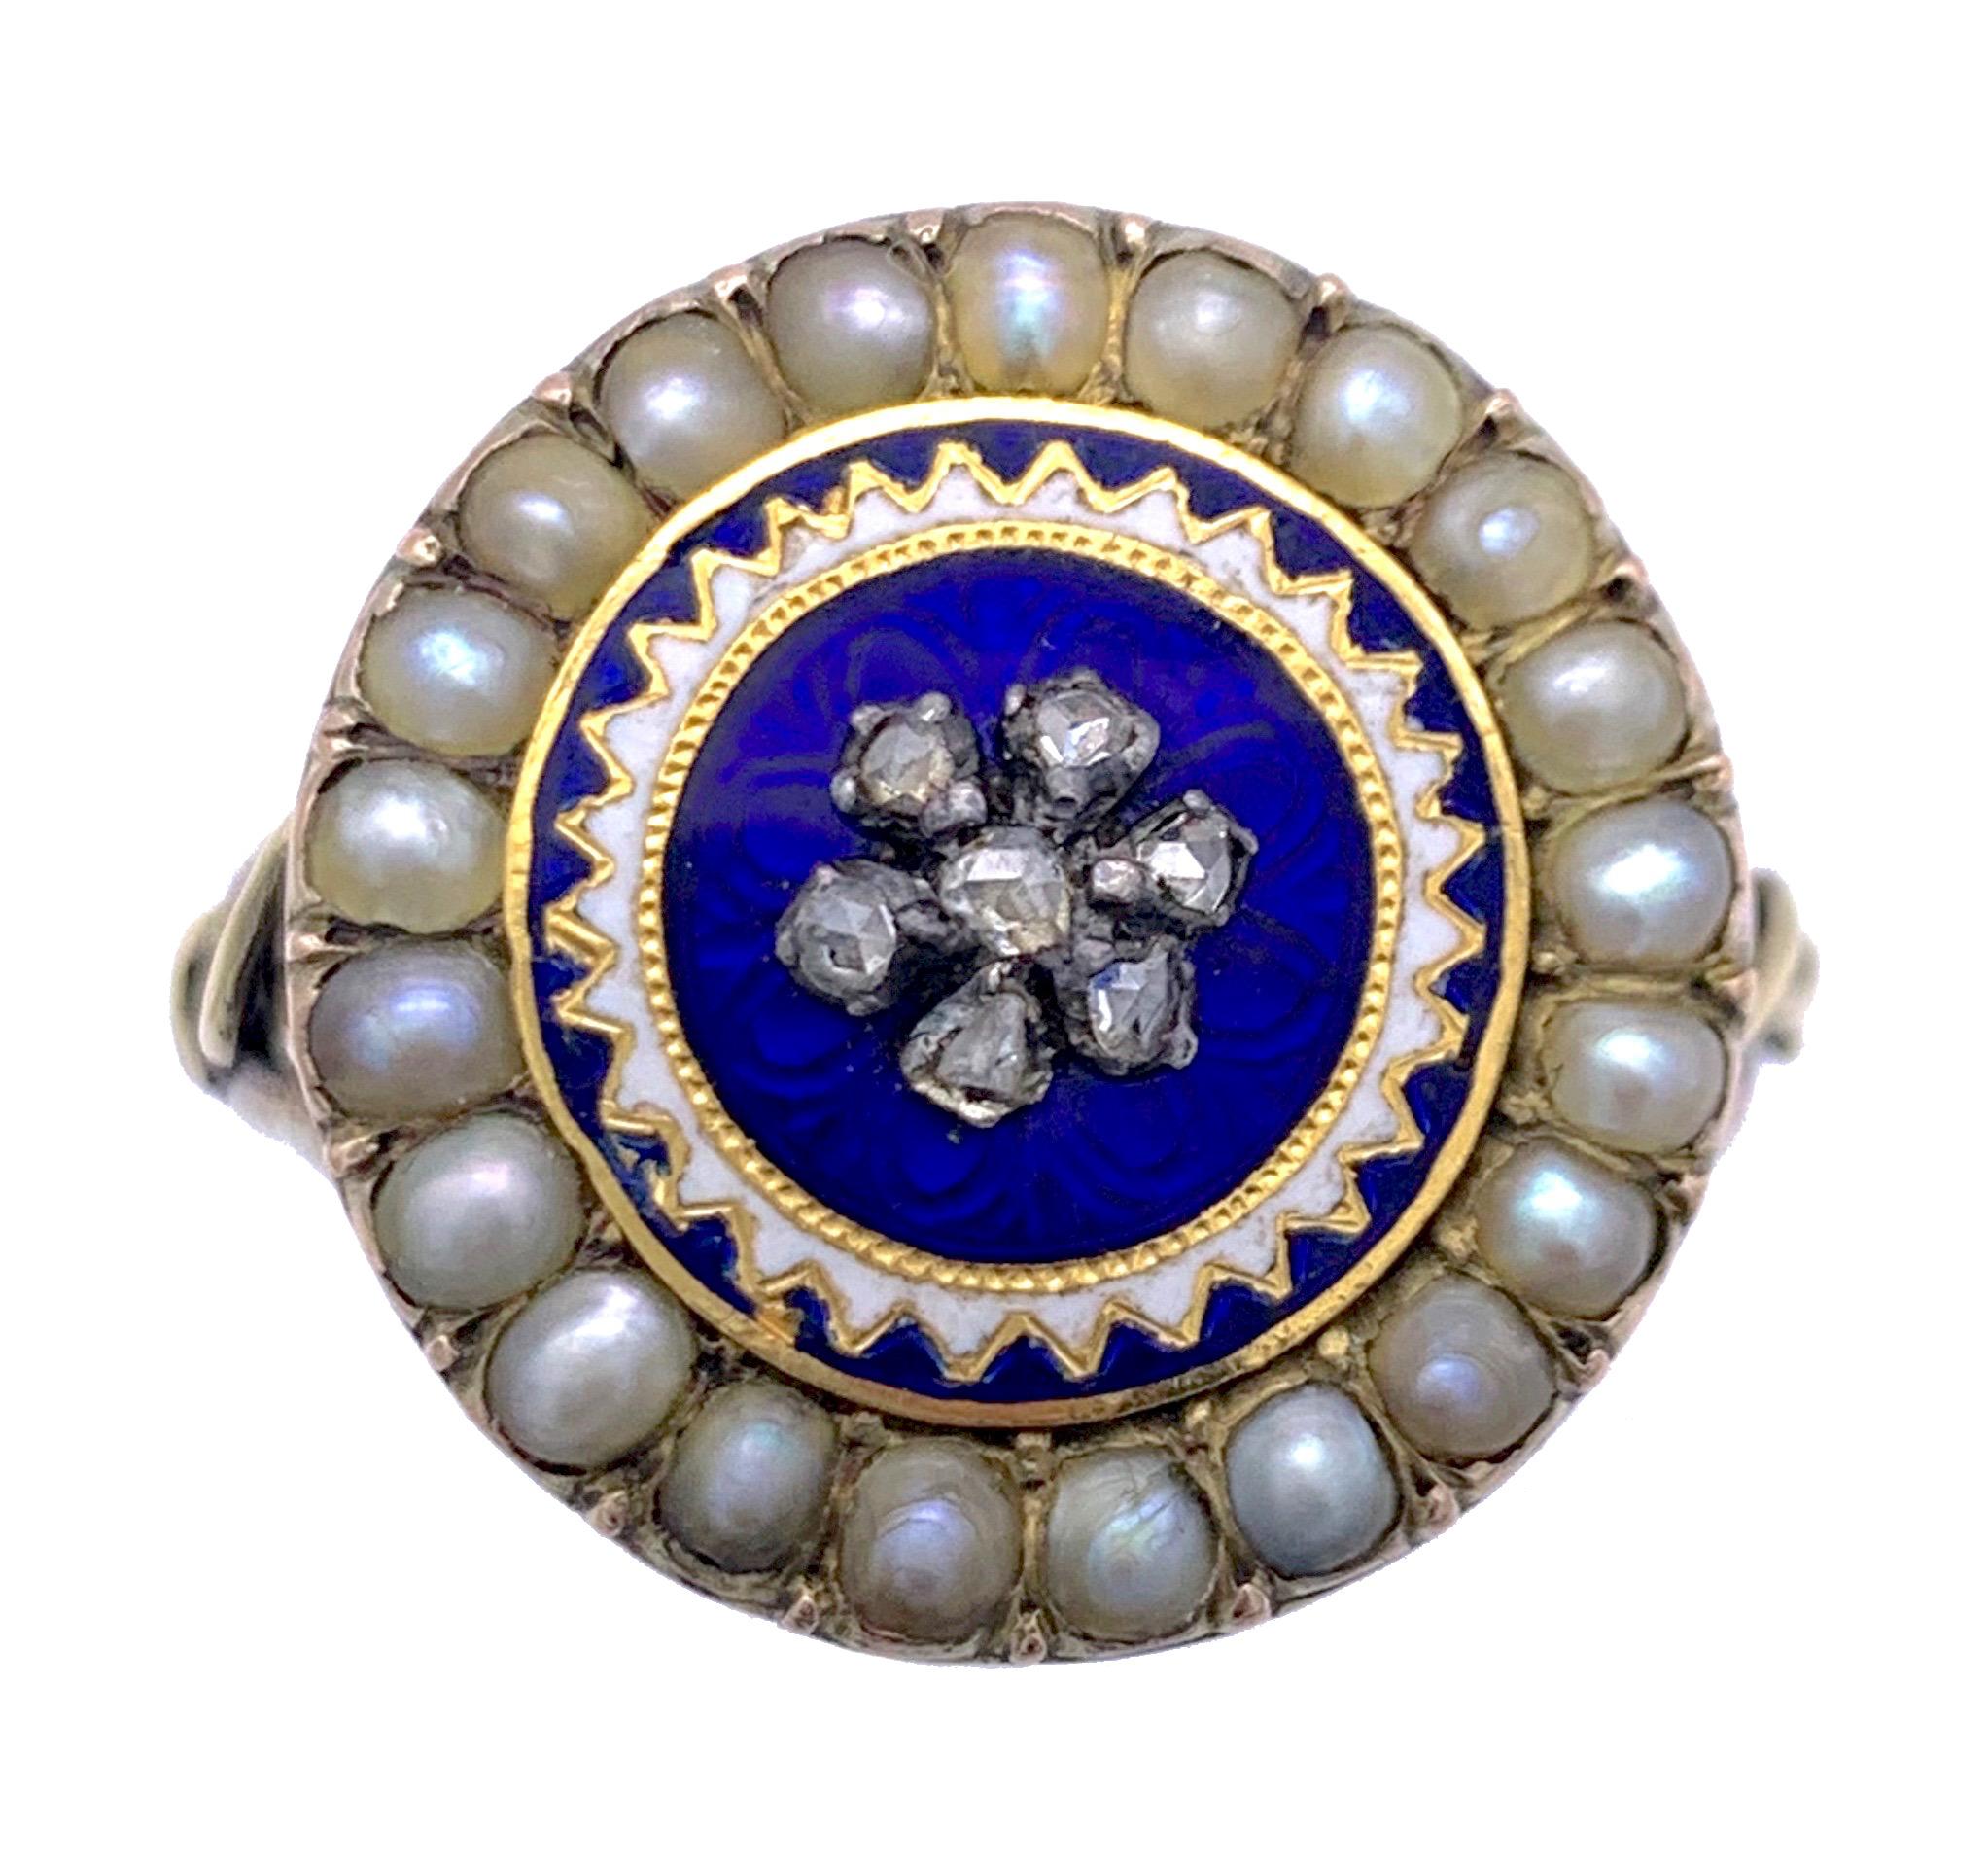 This elegant and rare Georgian dress ring features, on a translucent blue enamelled background, a flower made out of seven rose diamonds within a stylised sun.  A gold disk, covered with royal blue enamel is decorated with white enamelled sun rays